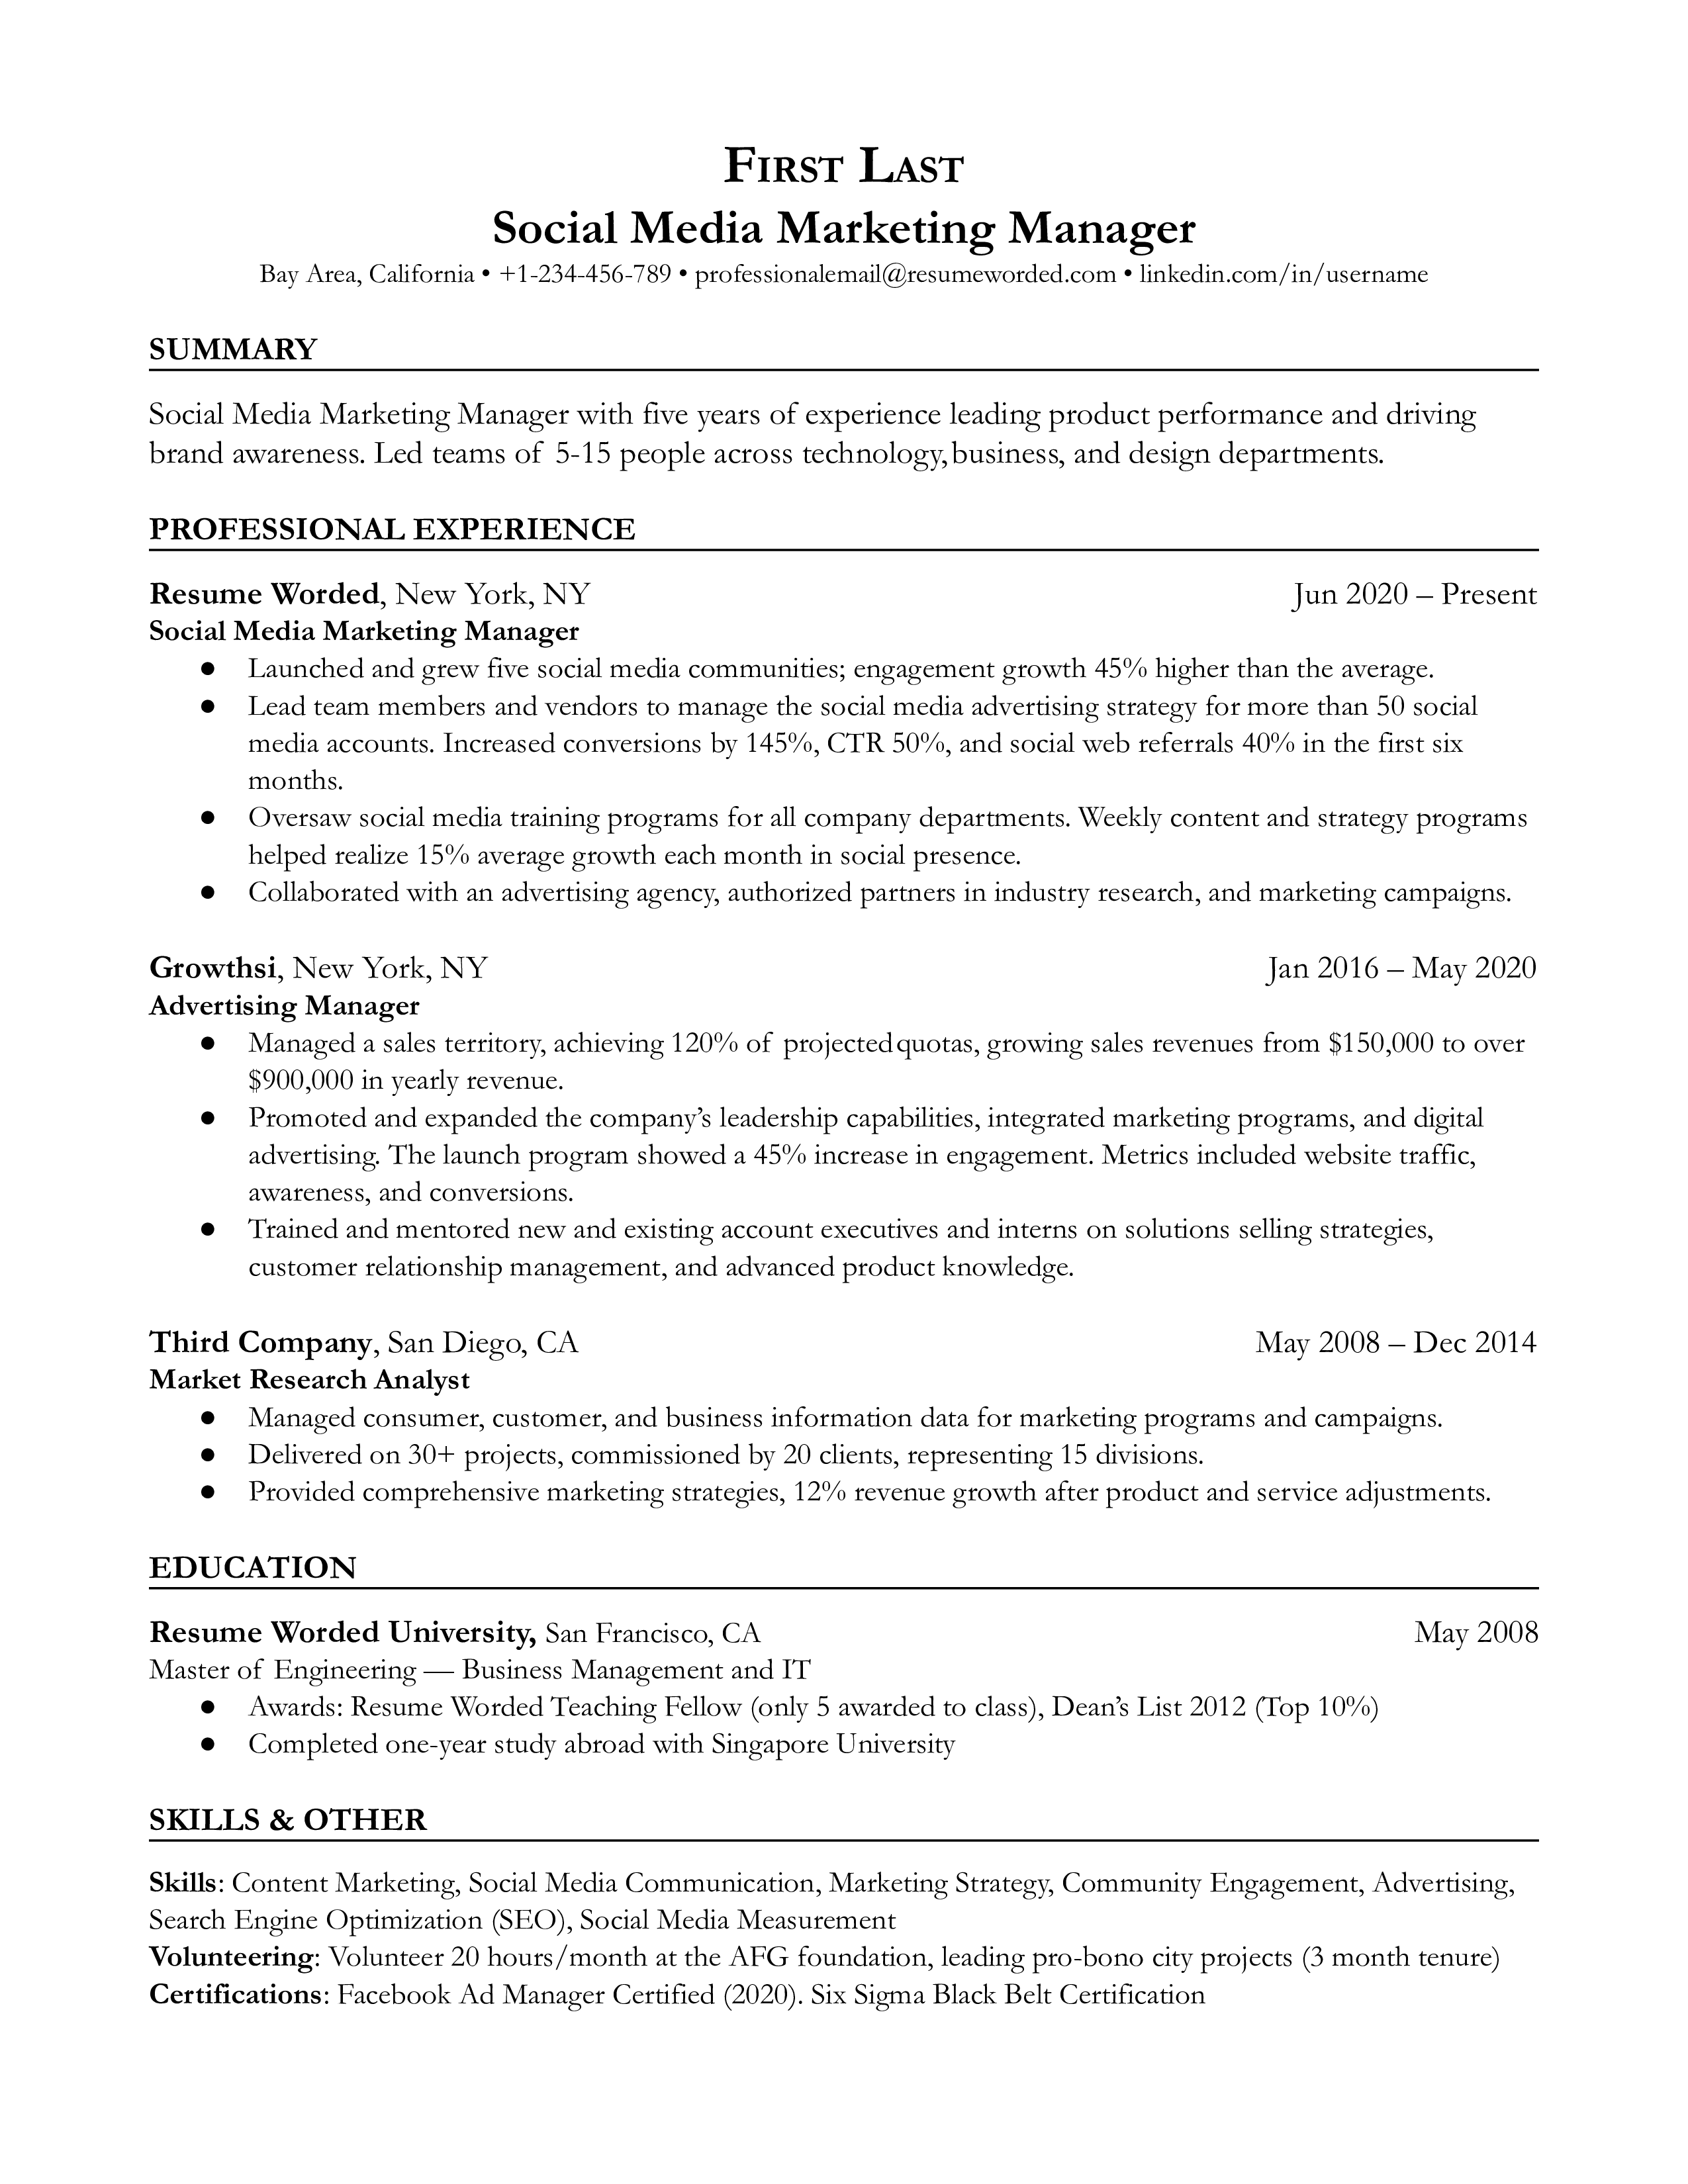 Social media manager resume example with a focus on marketing and marketing campaigns